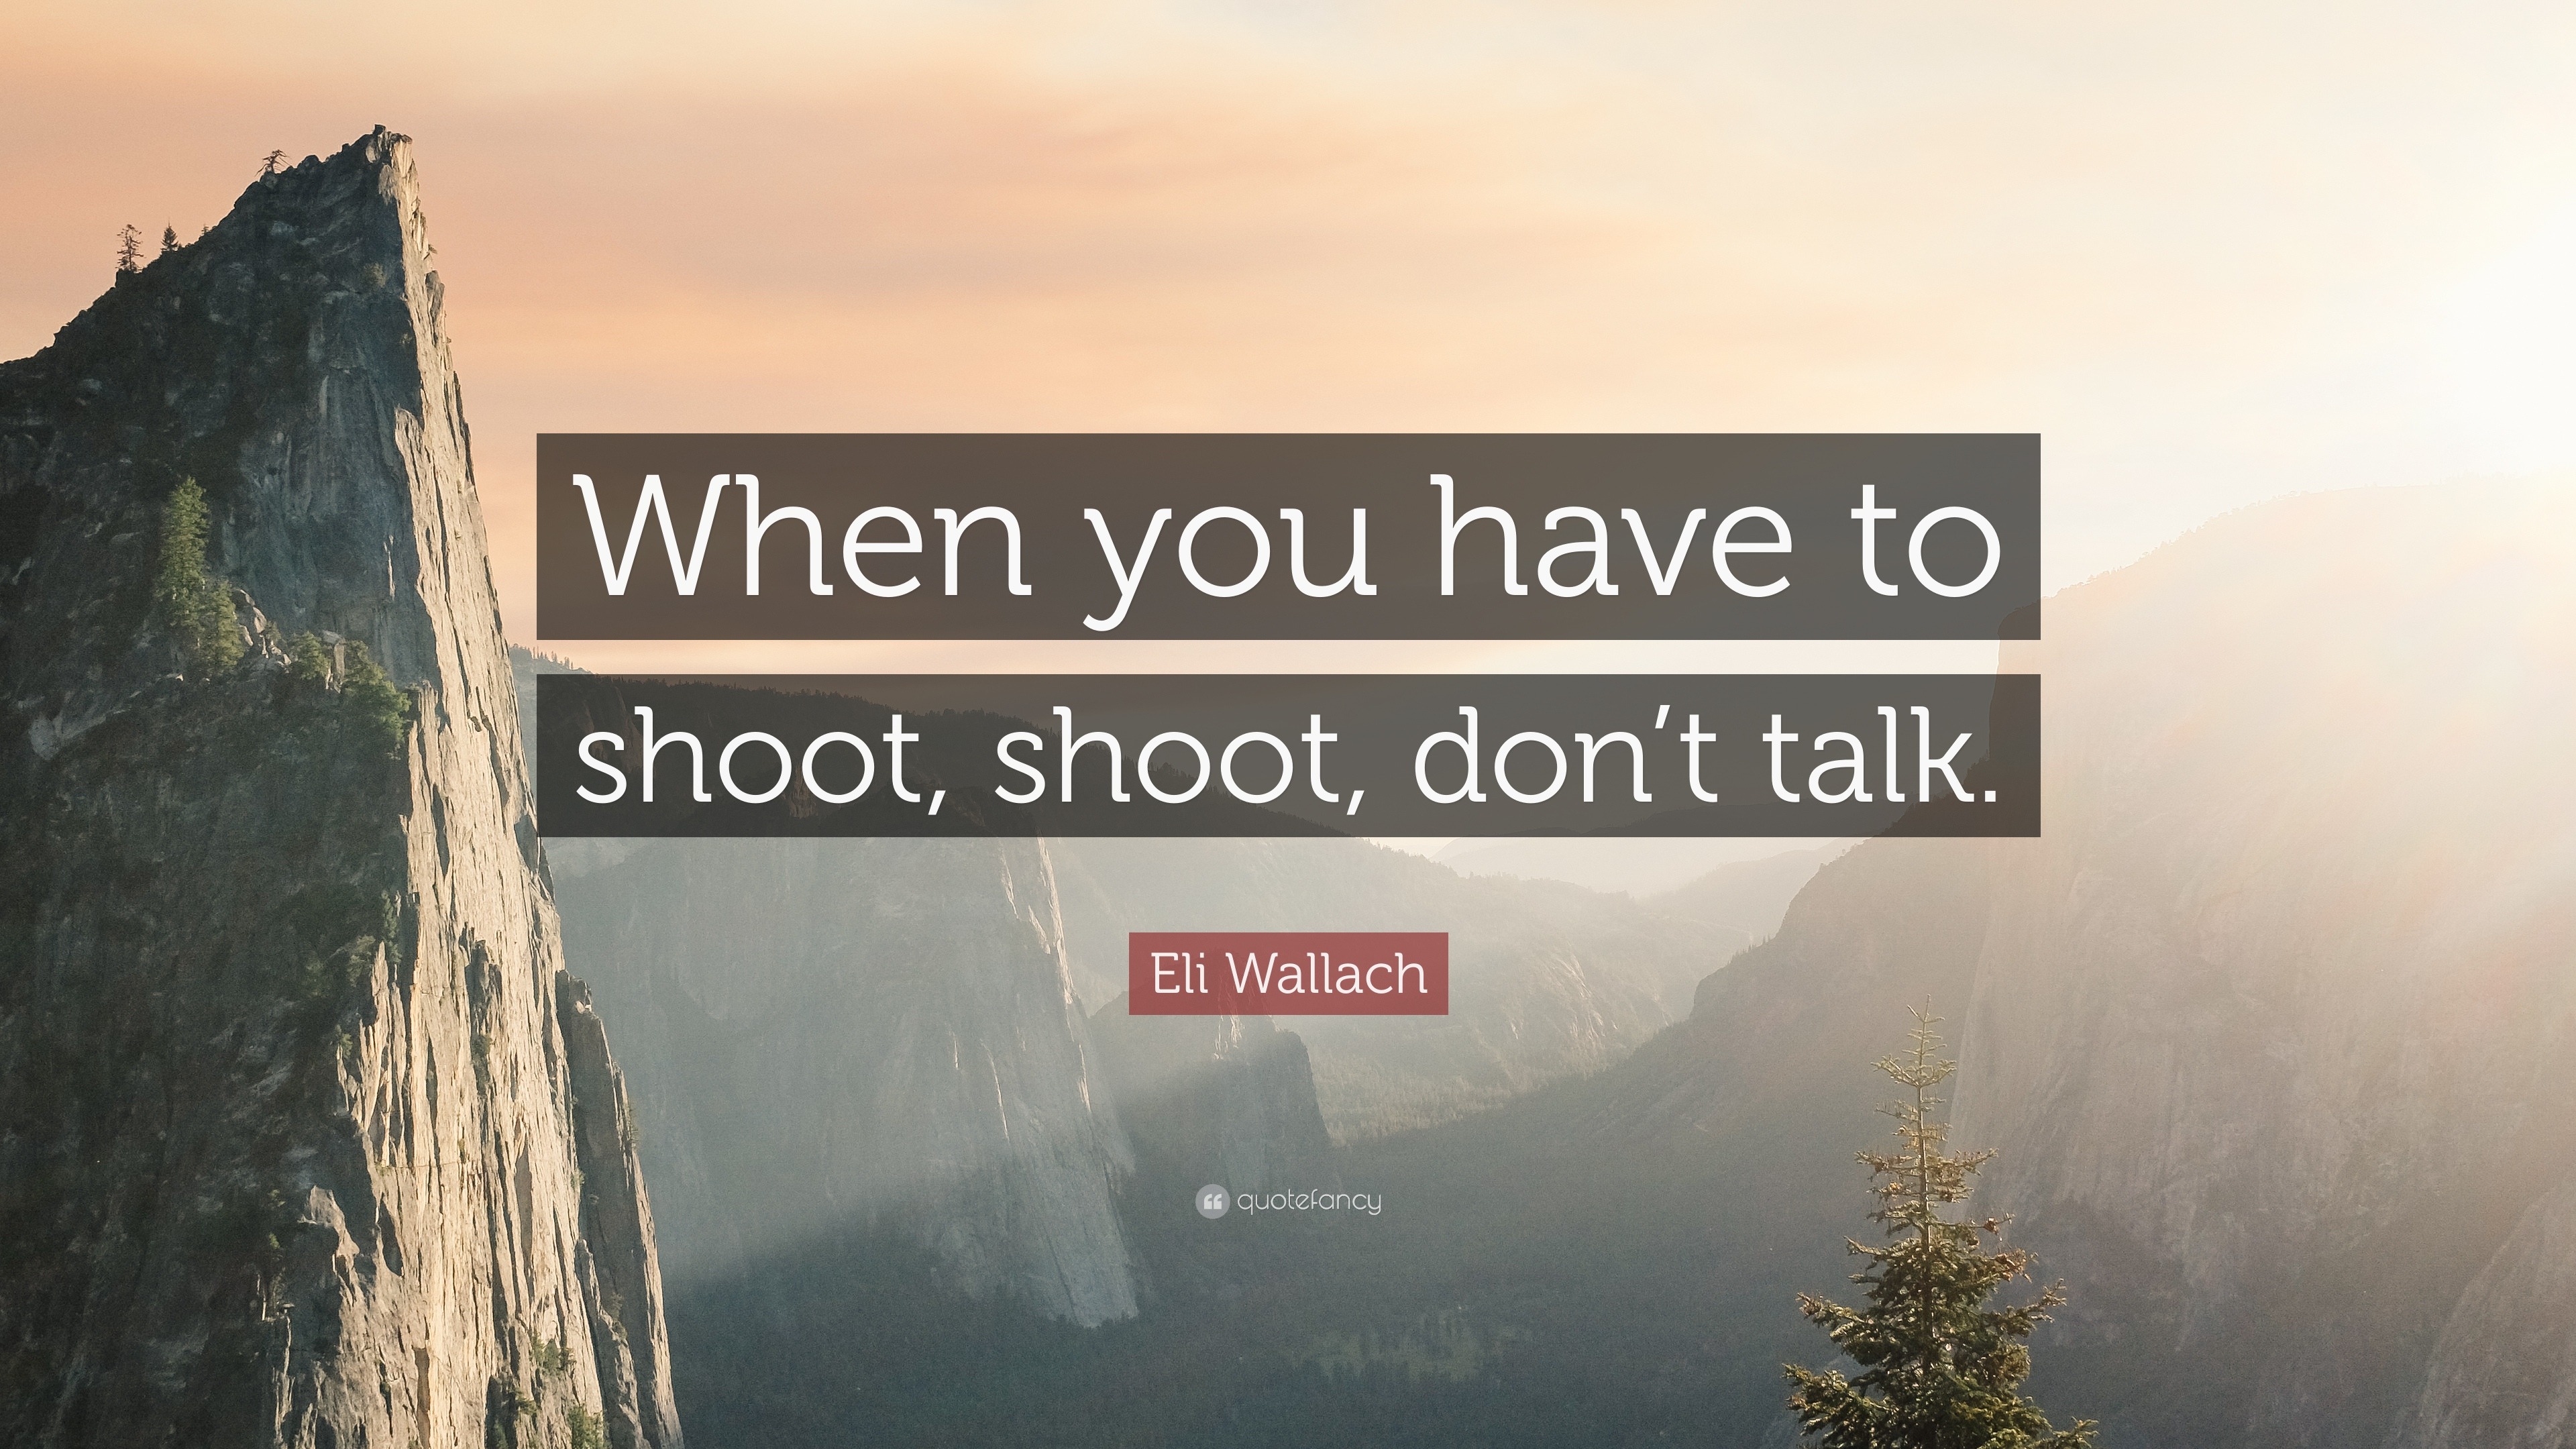 Eli Wallach Quote: “When you have to shoot, shoot, don’t talk.”